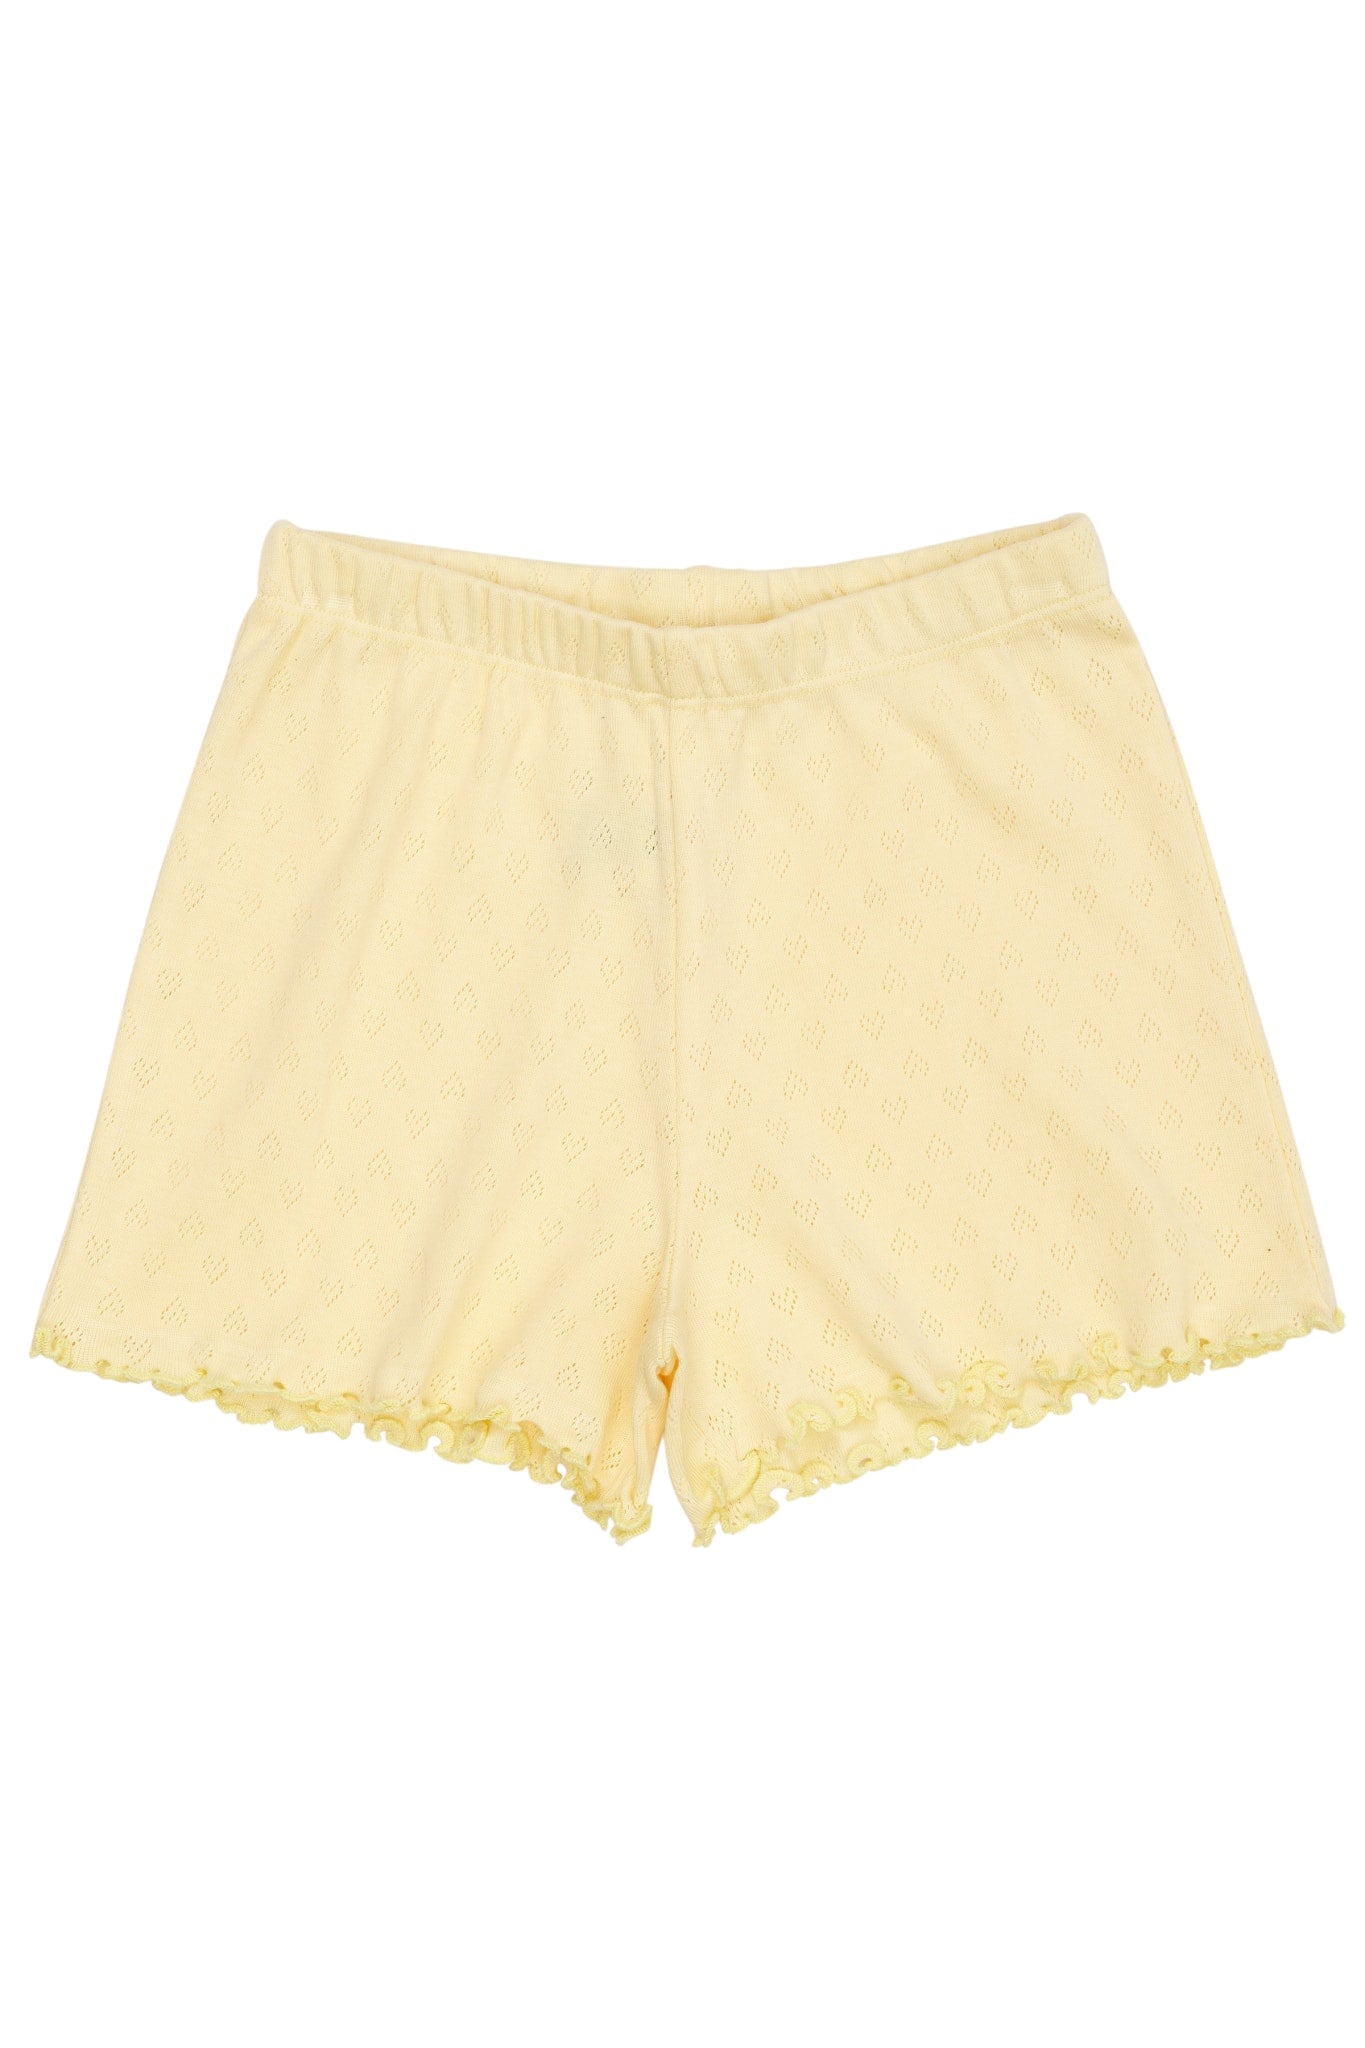 POINTELLE HEART SHORTS - PALE YELLOW